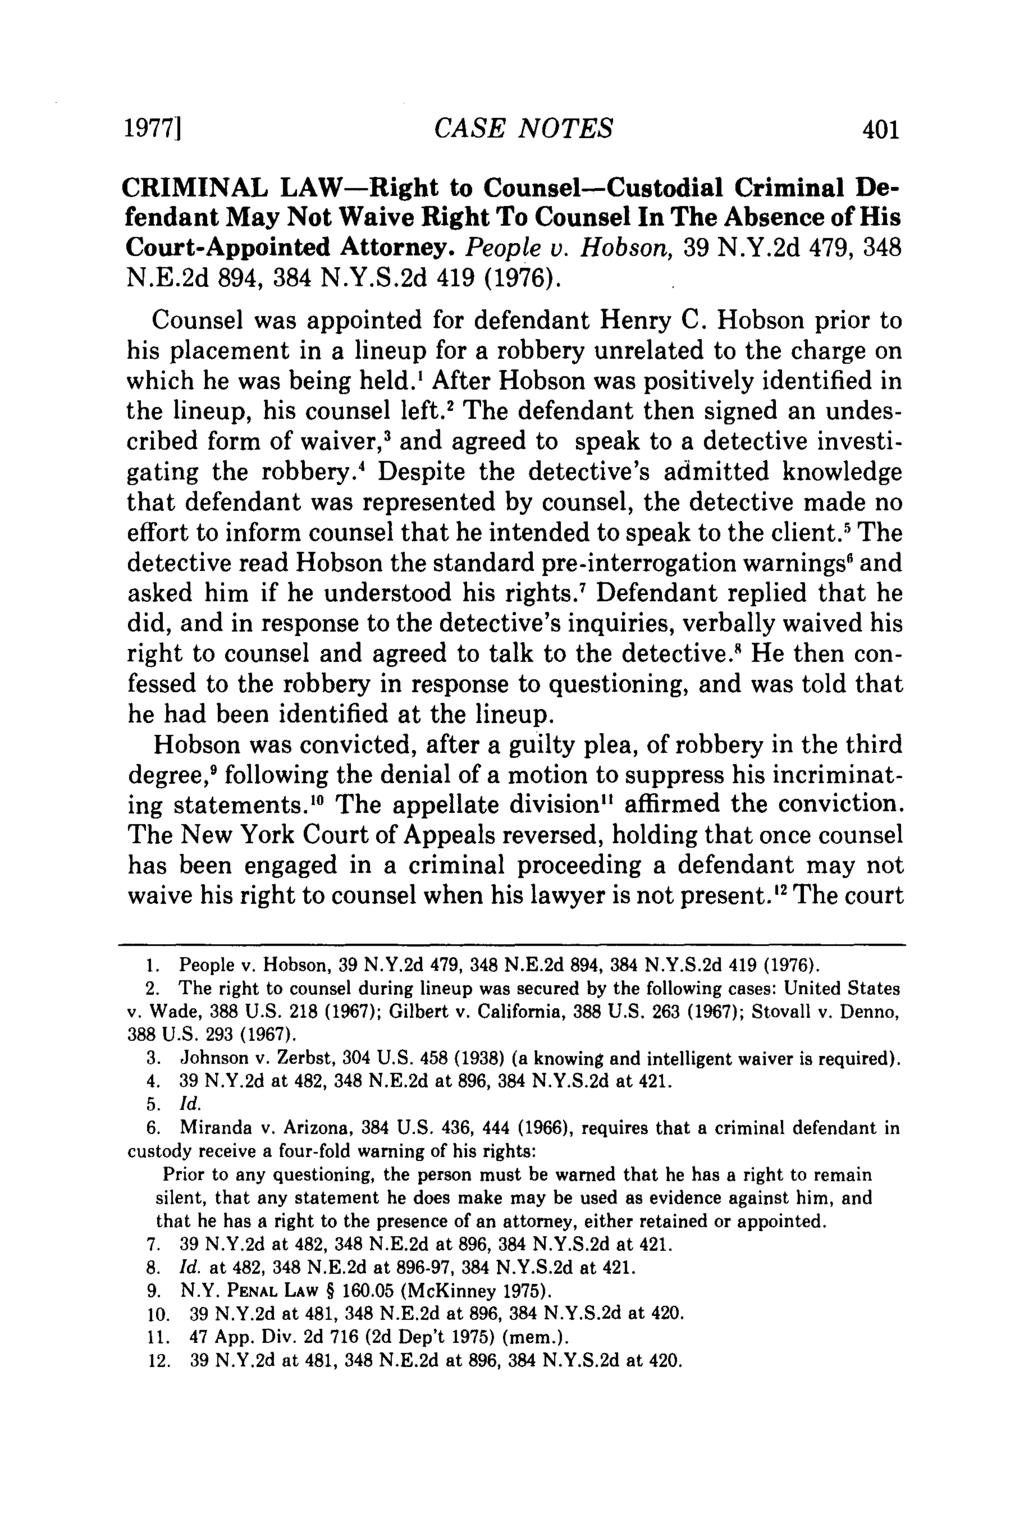 1977] CASE NOTES CRIMINAL LAW-Right to Counsel-Custodial Criminal Defendant May Not Waive Right To Counsel In The Absence of His Court-Appointed Attorney. People v. Hobson, 39 N.Y.2d 479, 348 N.E.2d 894, 384 N.